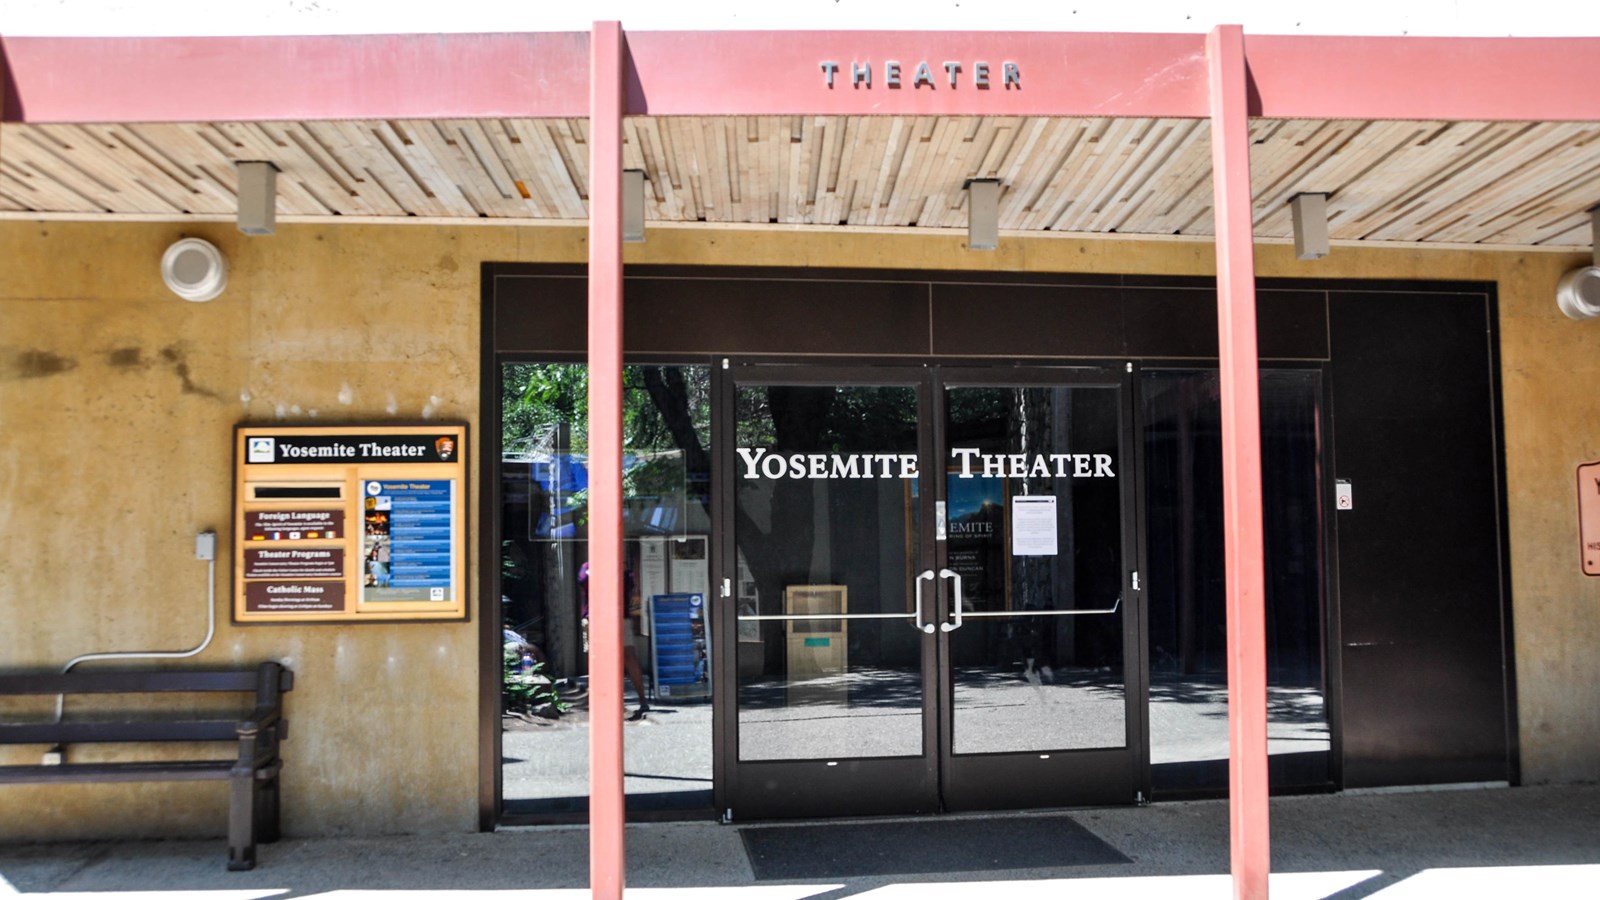 Double glass doors as the entrance to the theater